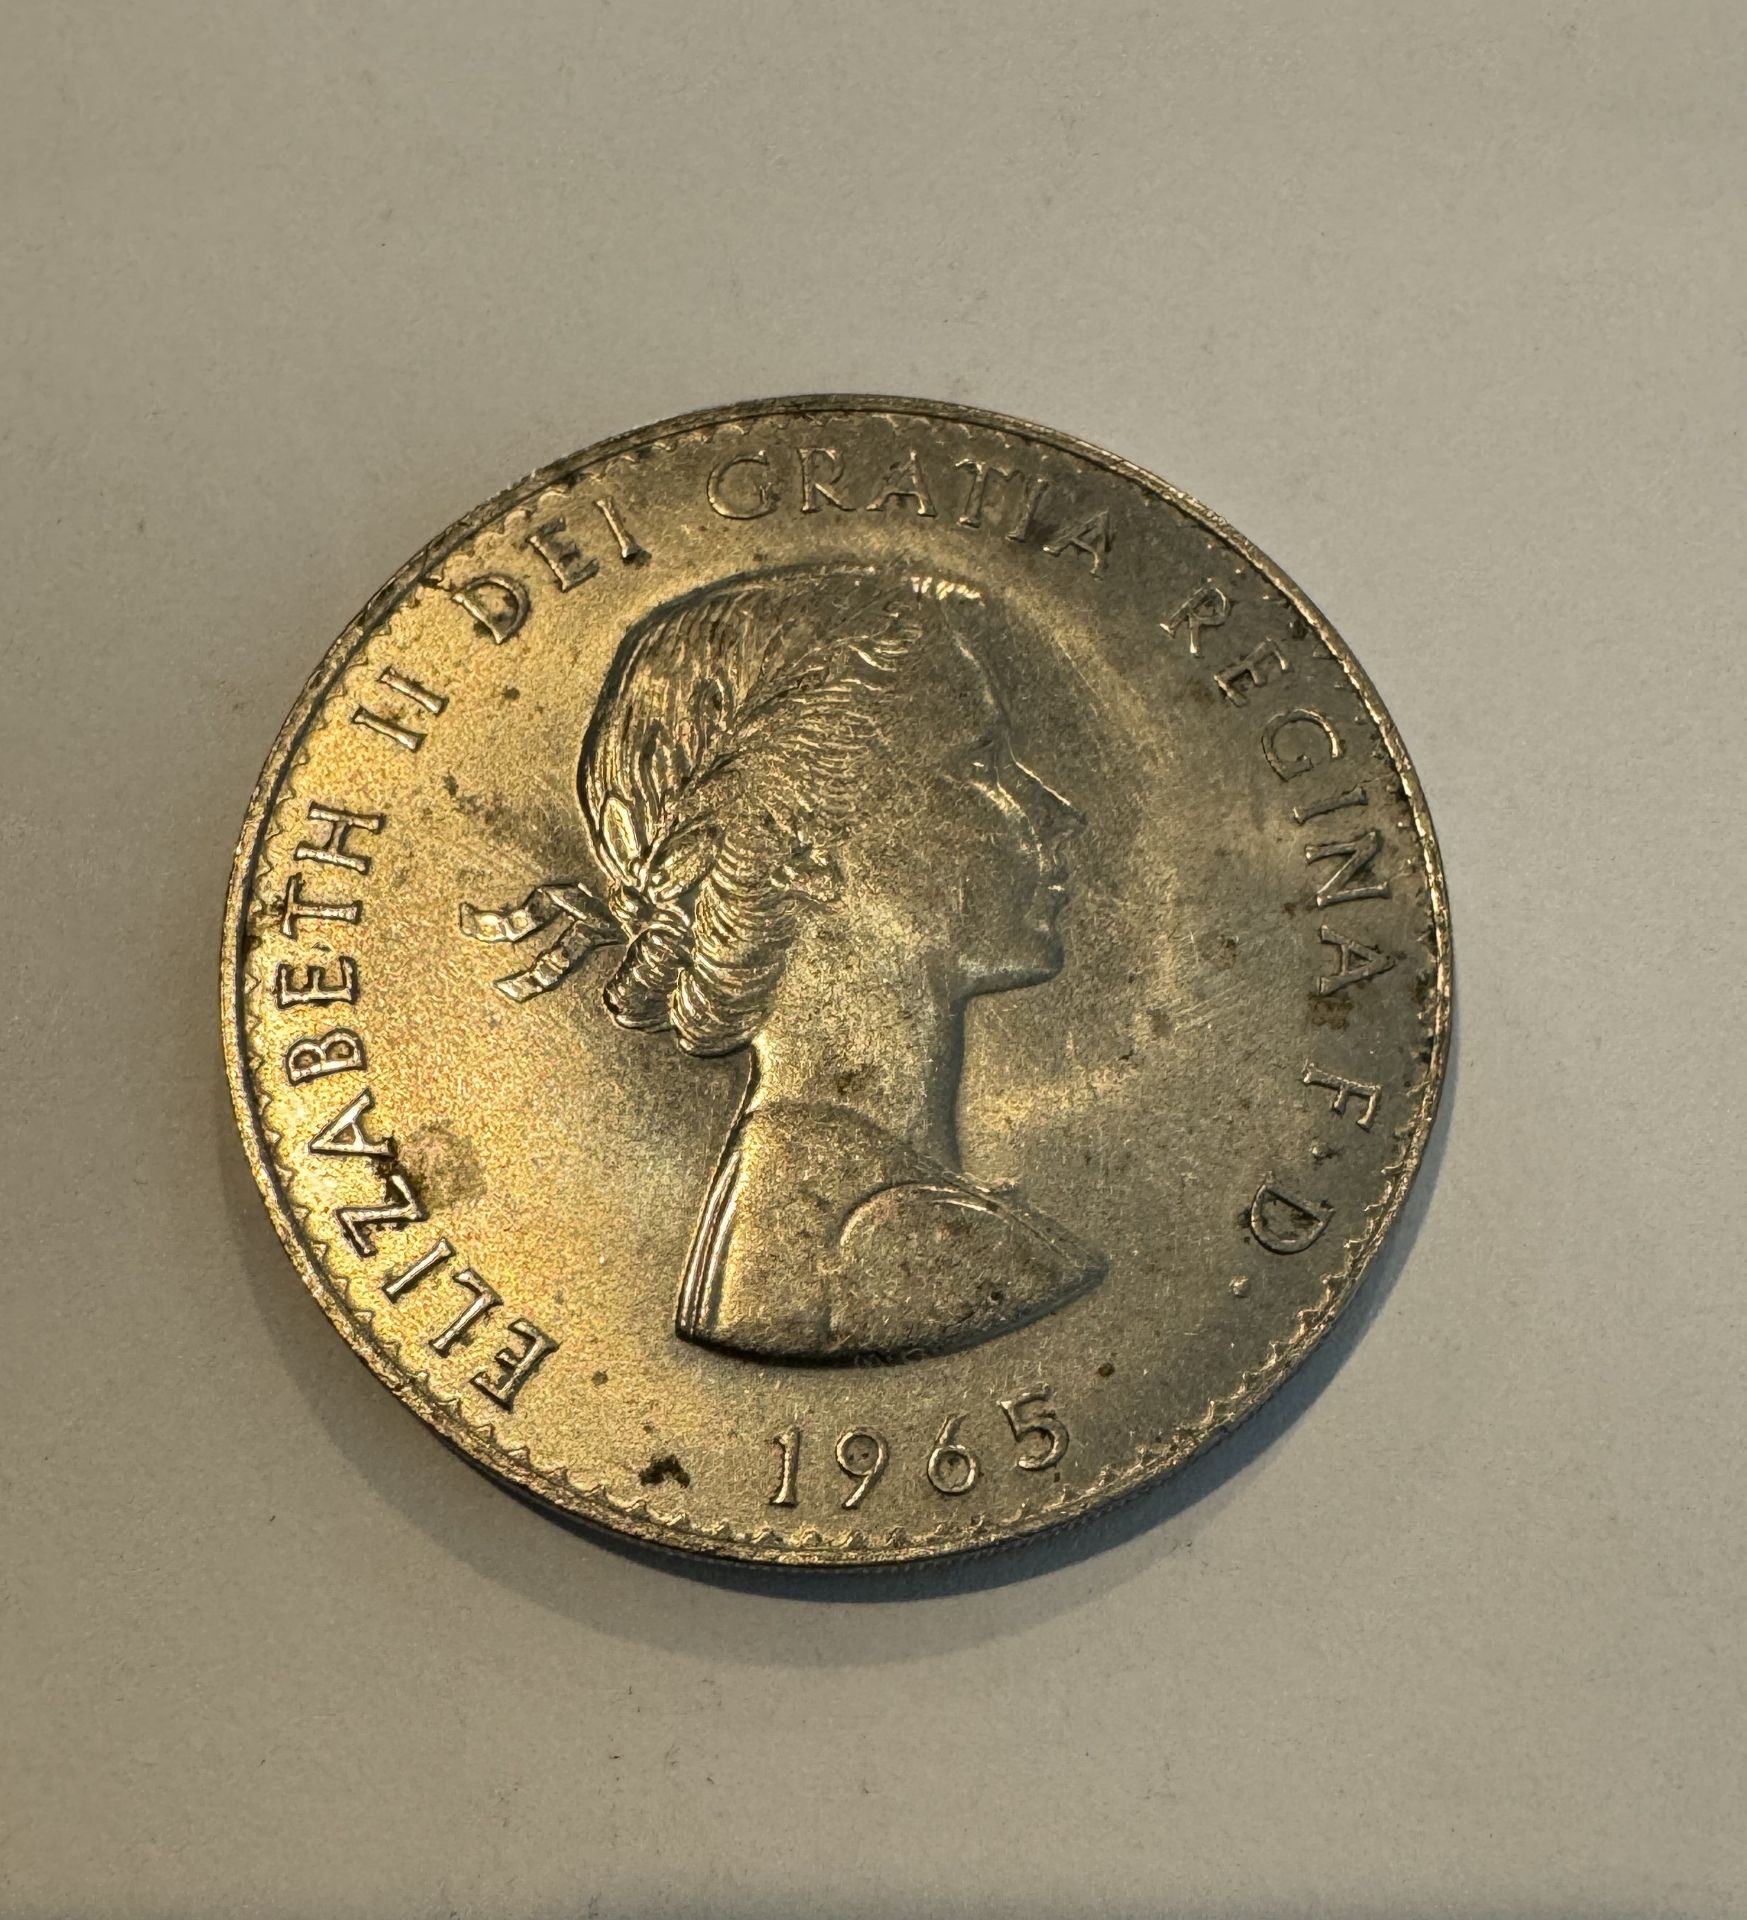 1965 SIR WINSTON CHURCHILL COMMEMORATIVE CROWN COIN - Image 2 of 2